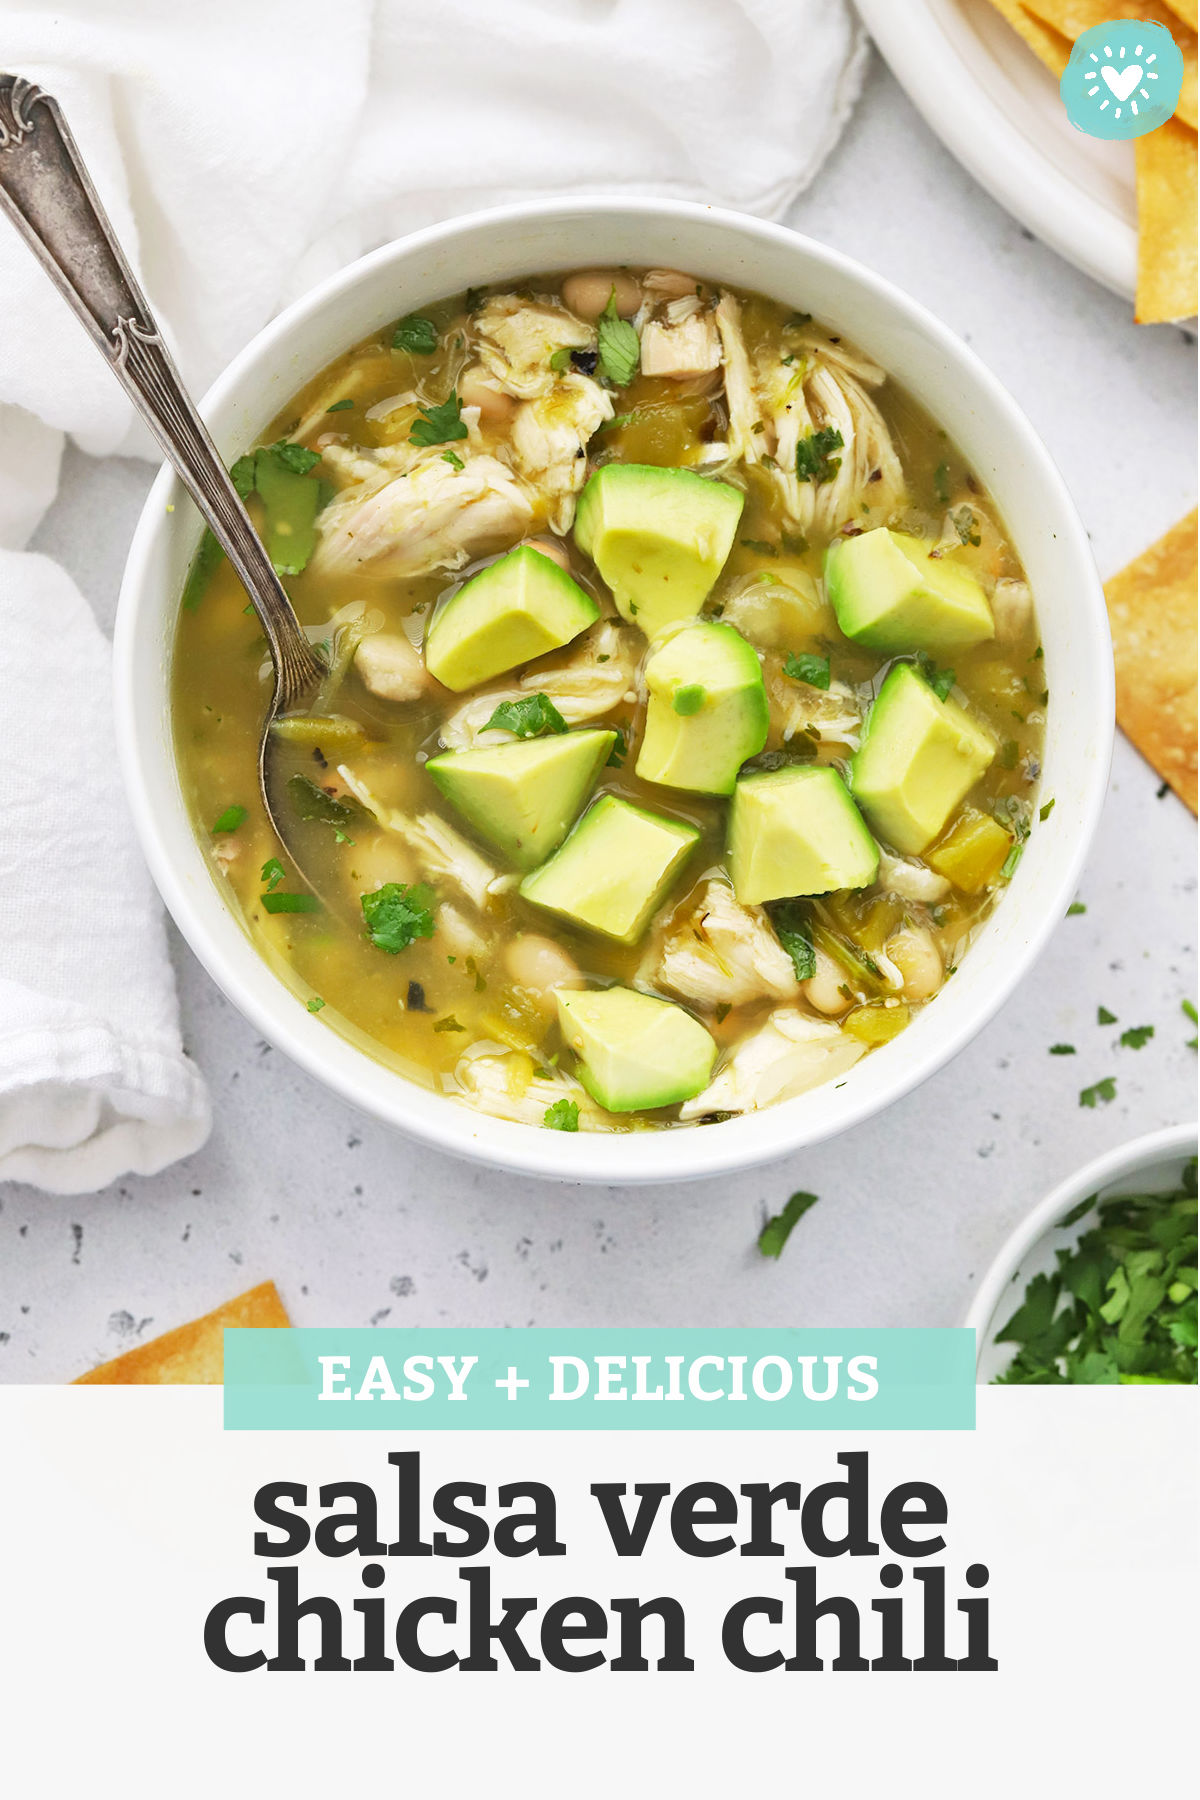 Salsa Verde Chicken Chili - This might be the EASIEST chili recipe ever! Just 7 ingredients + 15 minutes and you're ready to enjoy this lighter take on chili night. (Gluten-Free + Easy!) // White Chicken Chili // Healthy Chili Recipe // Chicken Chili Recipe // Healthy Soup #chili #chickenchili #whitechili #healthysoup